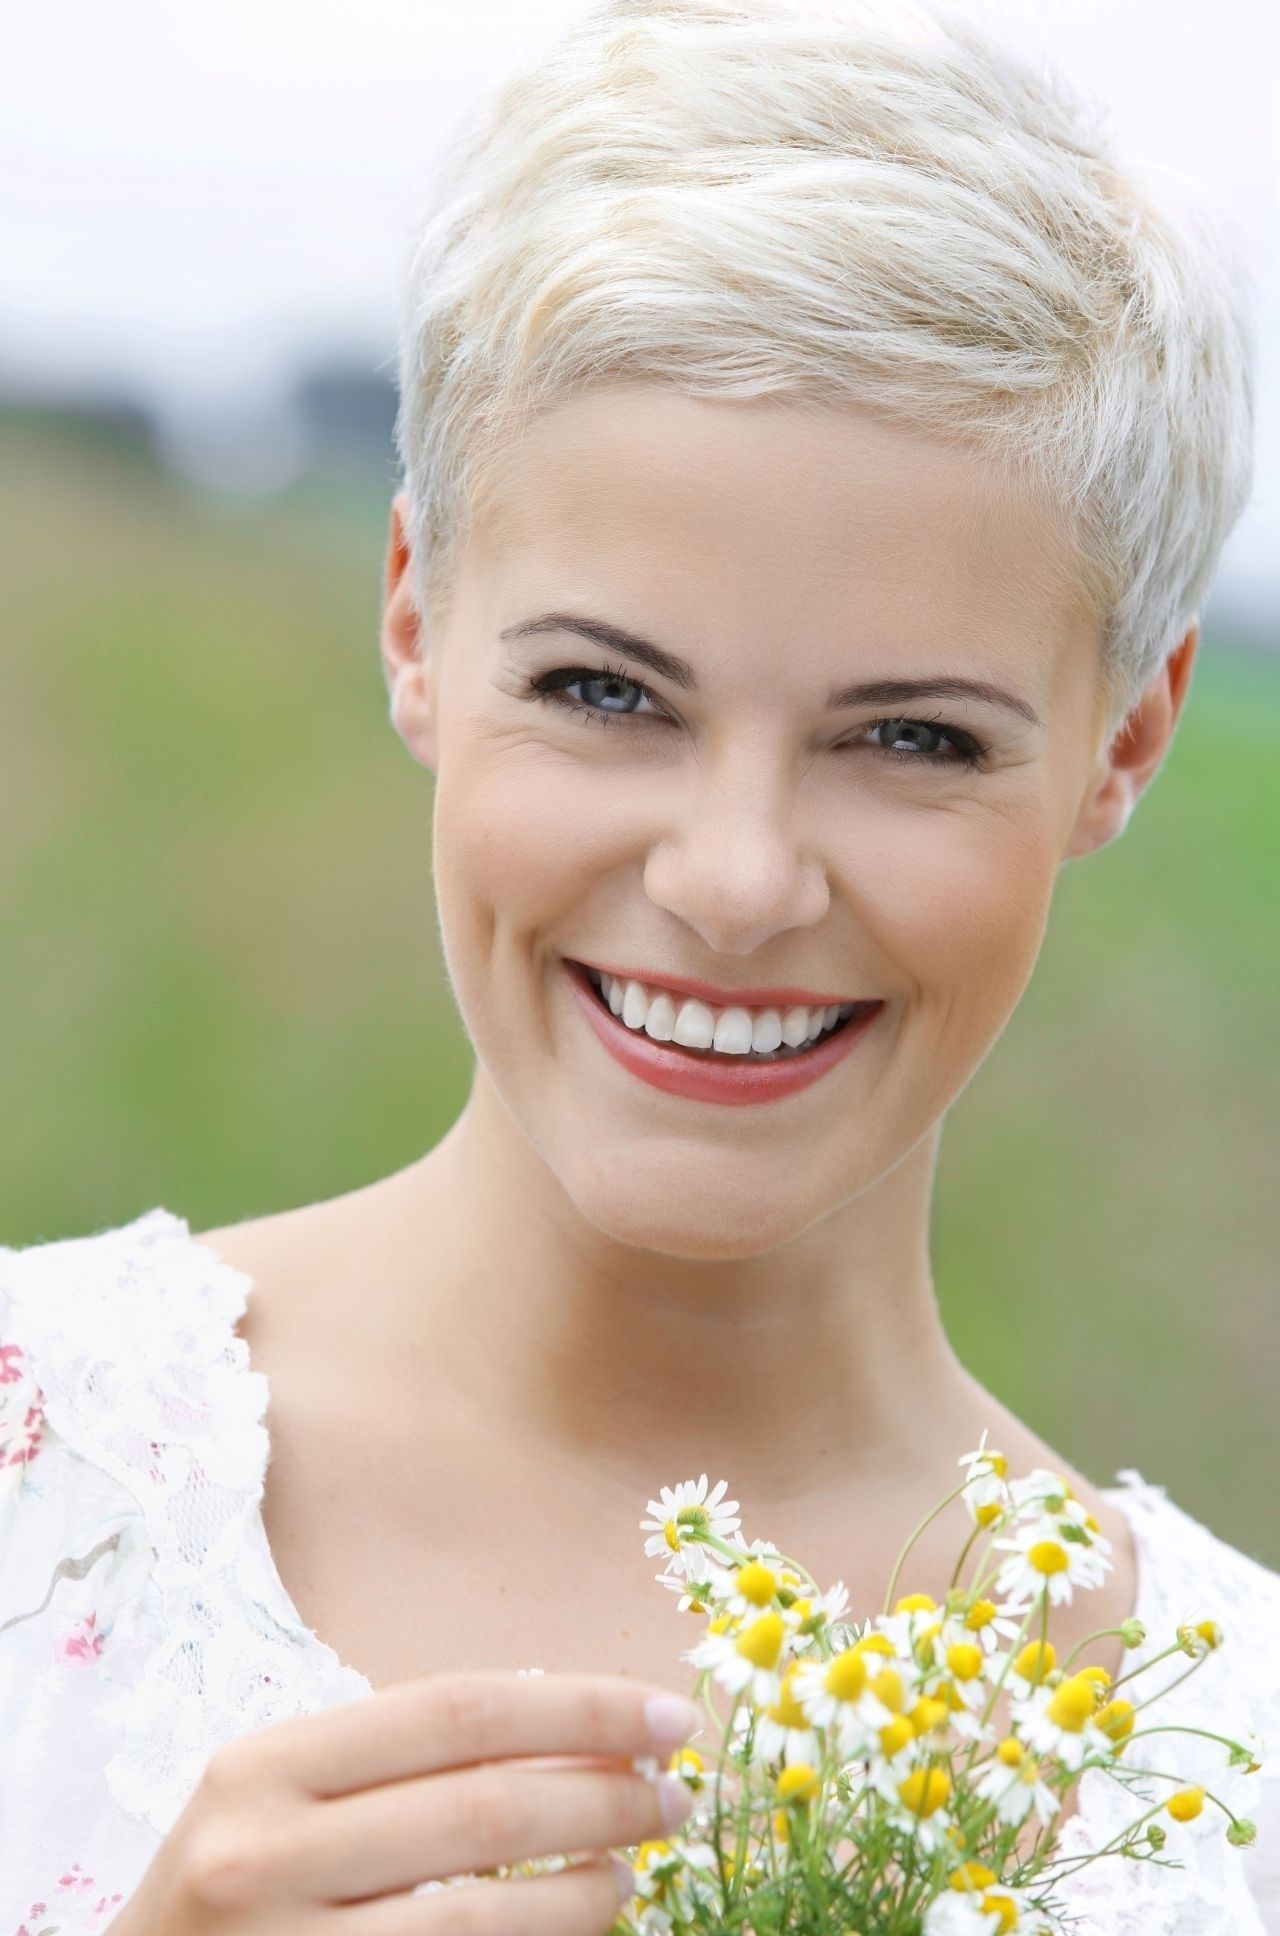 Short Pixie Haircut New Short Blonde Hairstyles Short Hairstyles Most Intended For Recent Very Short Pixie Hairstyles (Photo 9 of 15)